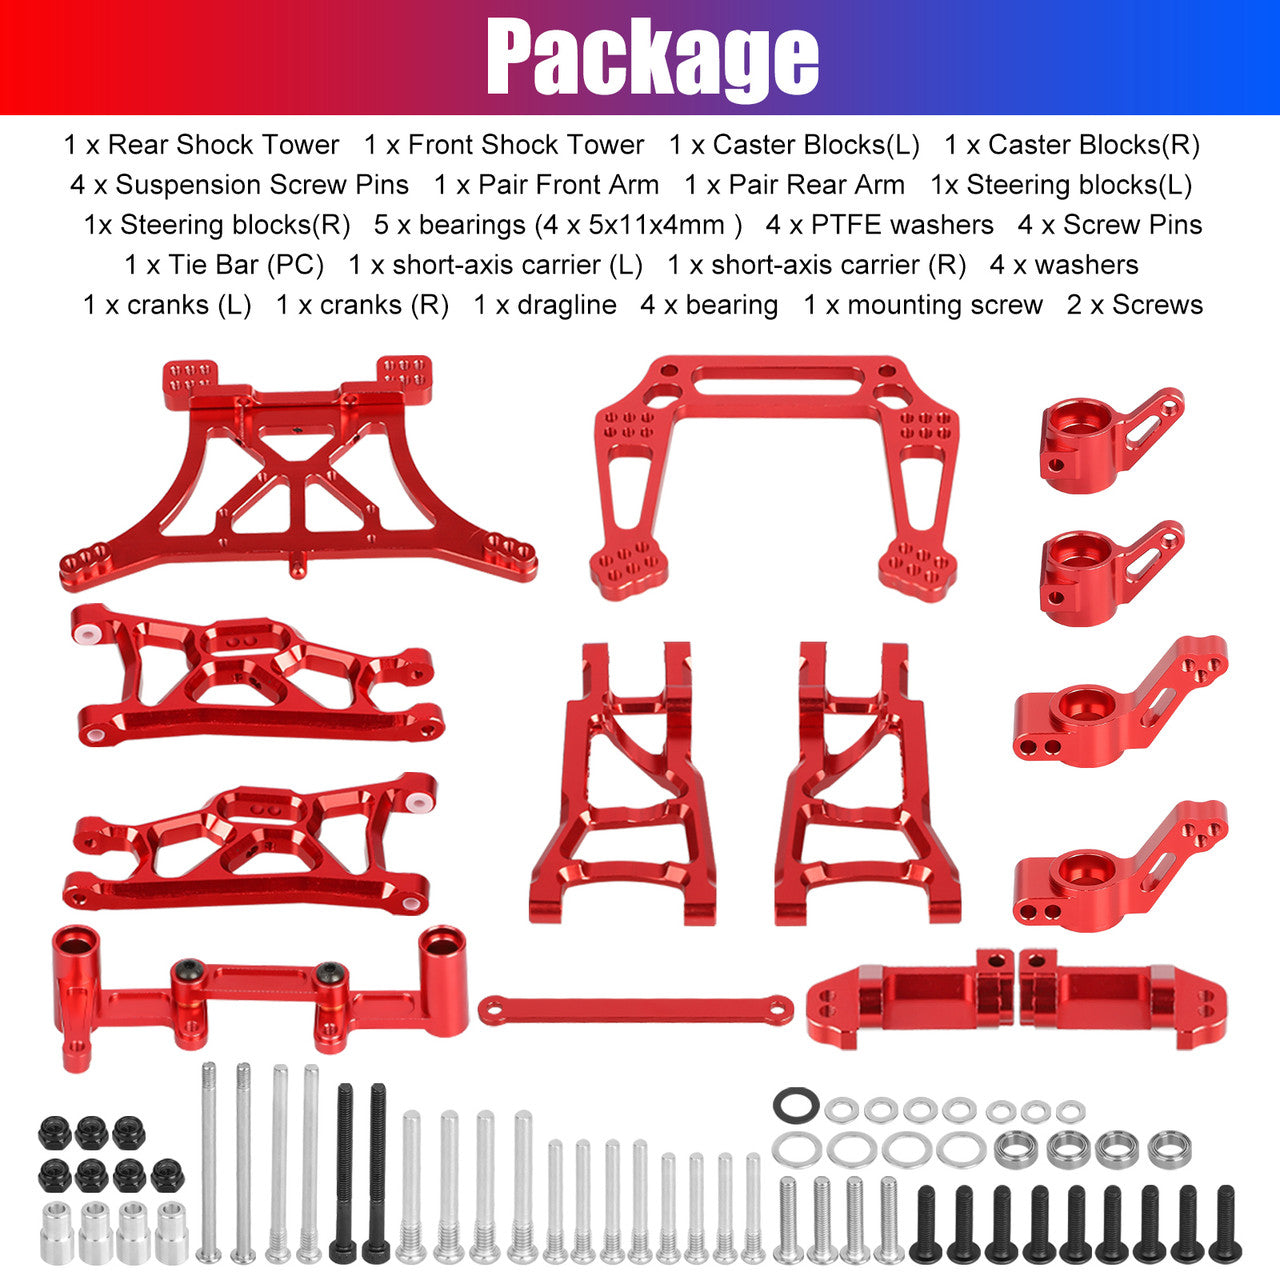 Metal Full Set RC Car Parts that Offer Lightweight Performance,For 1/10 Traxxas Slash 2WD, Red